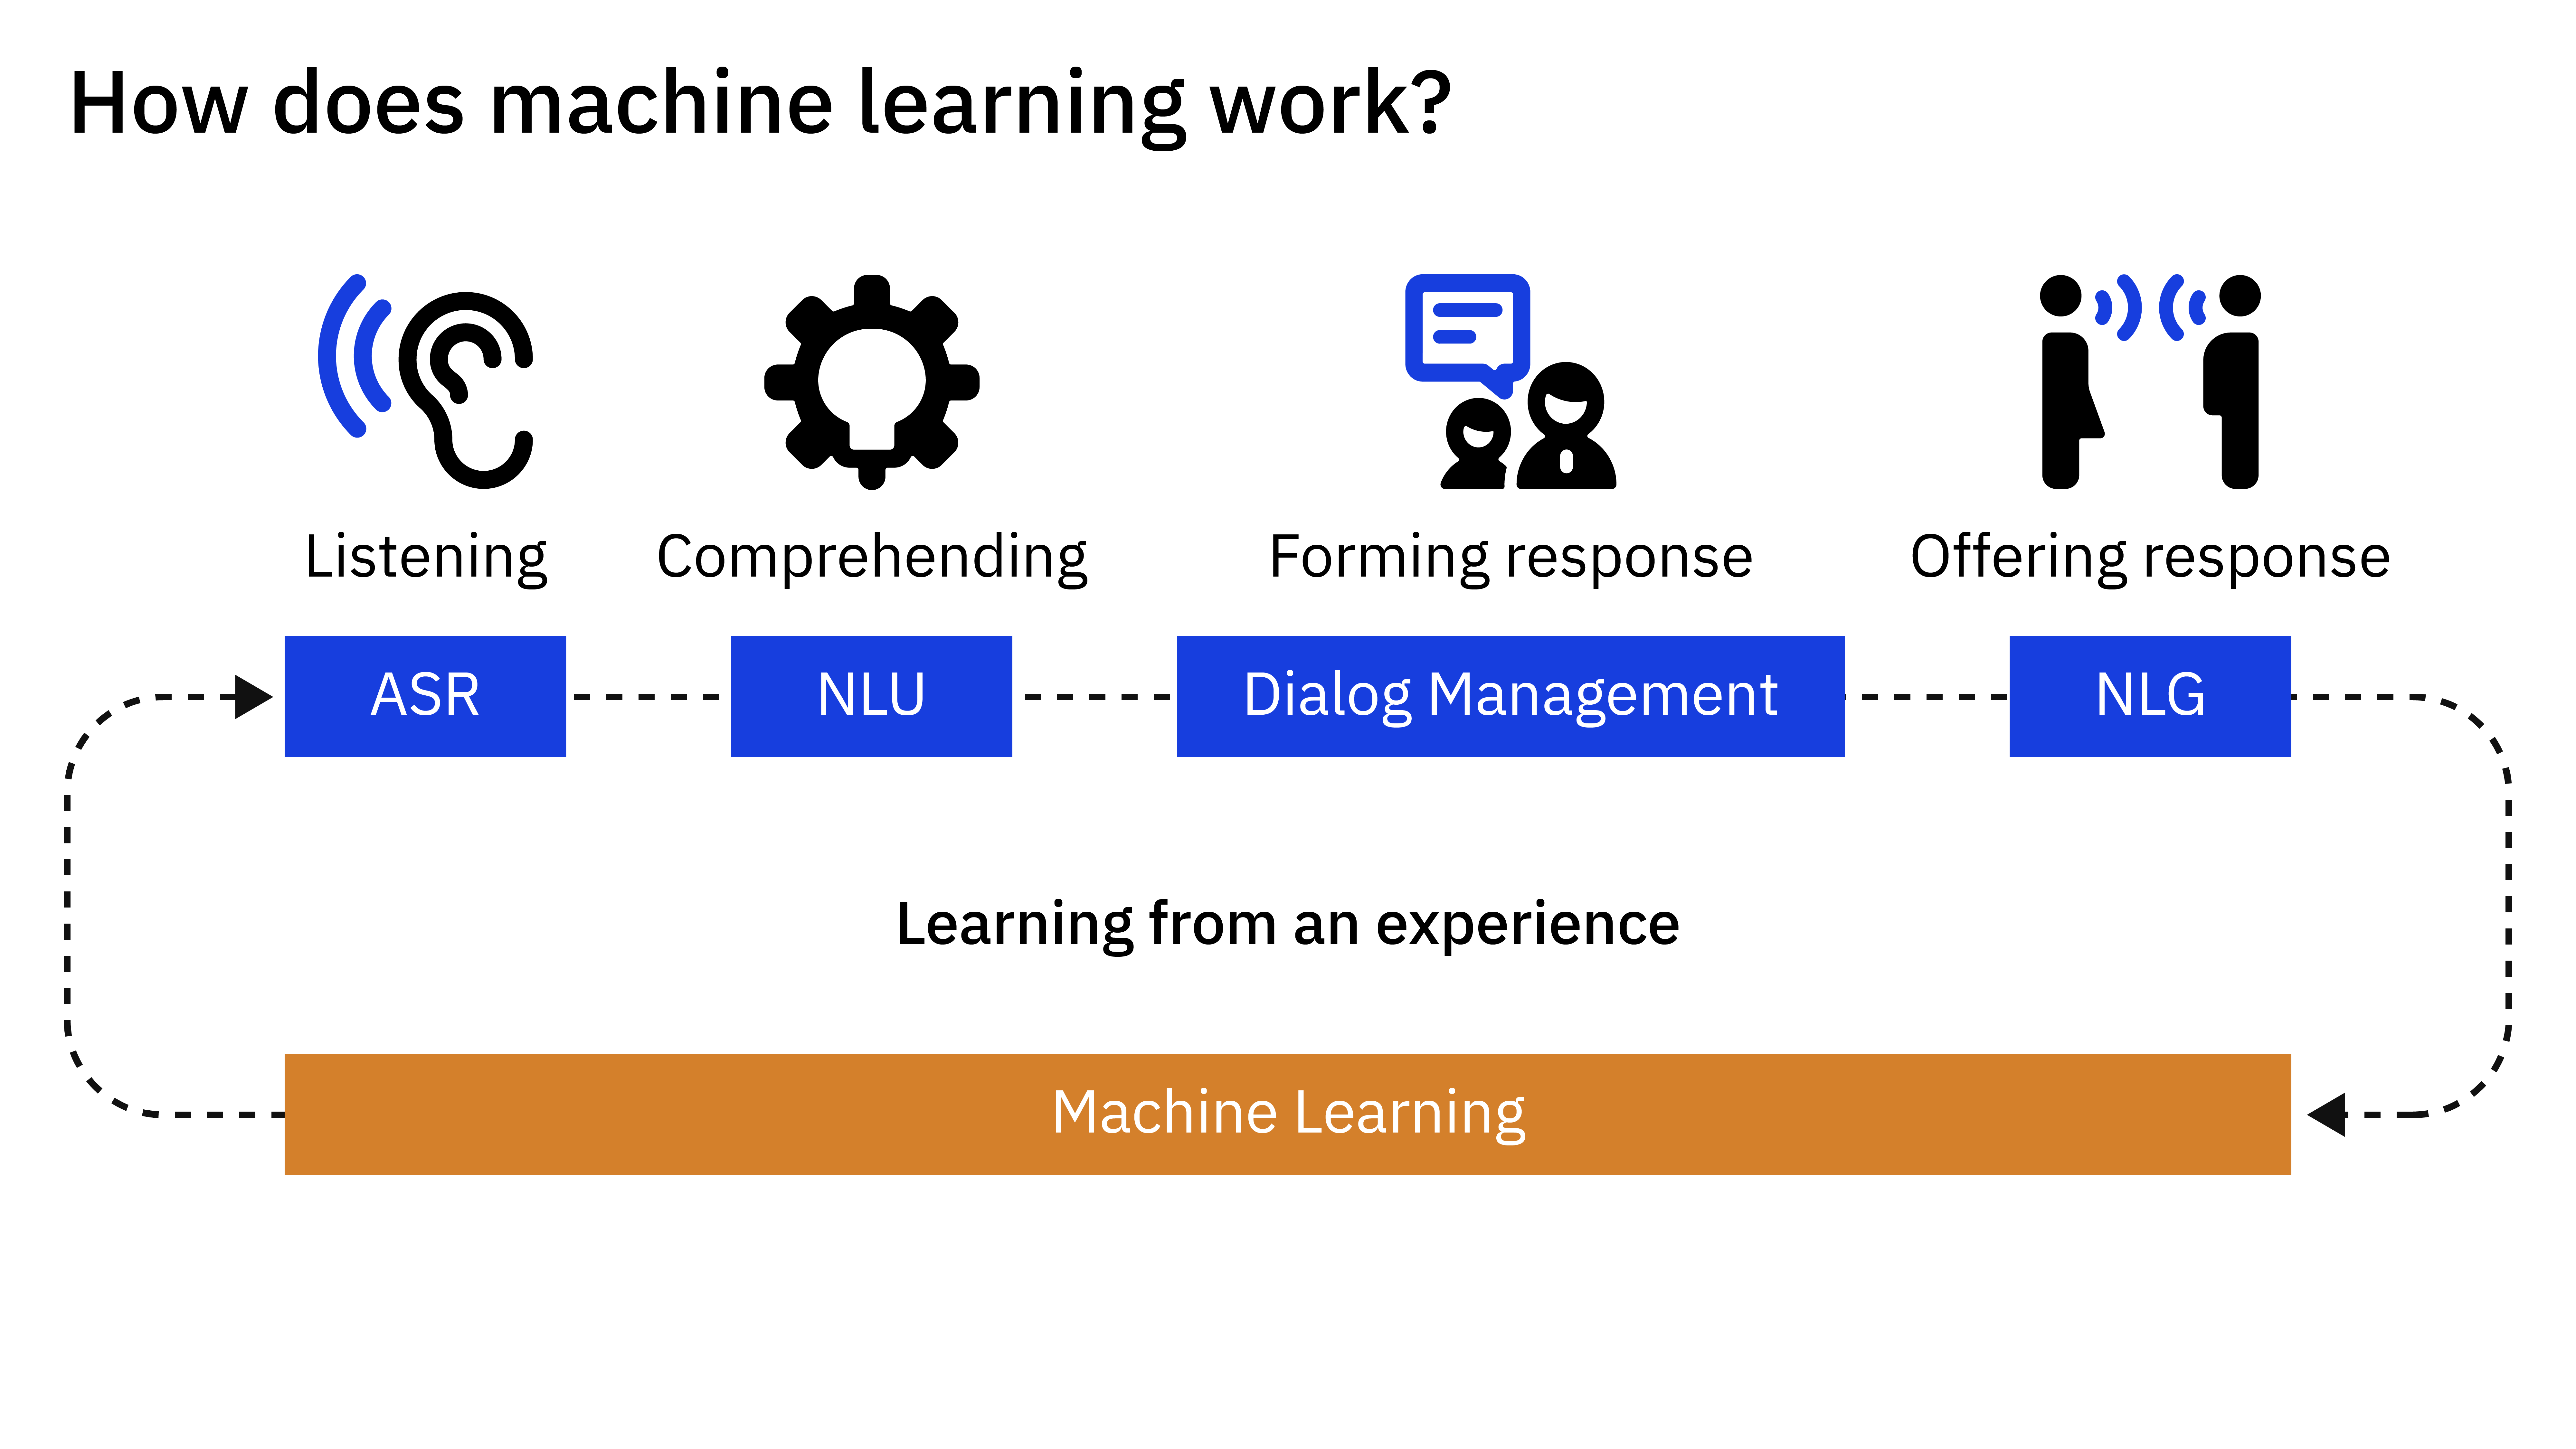 How does machine learning work?